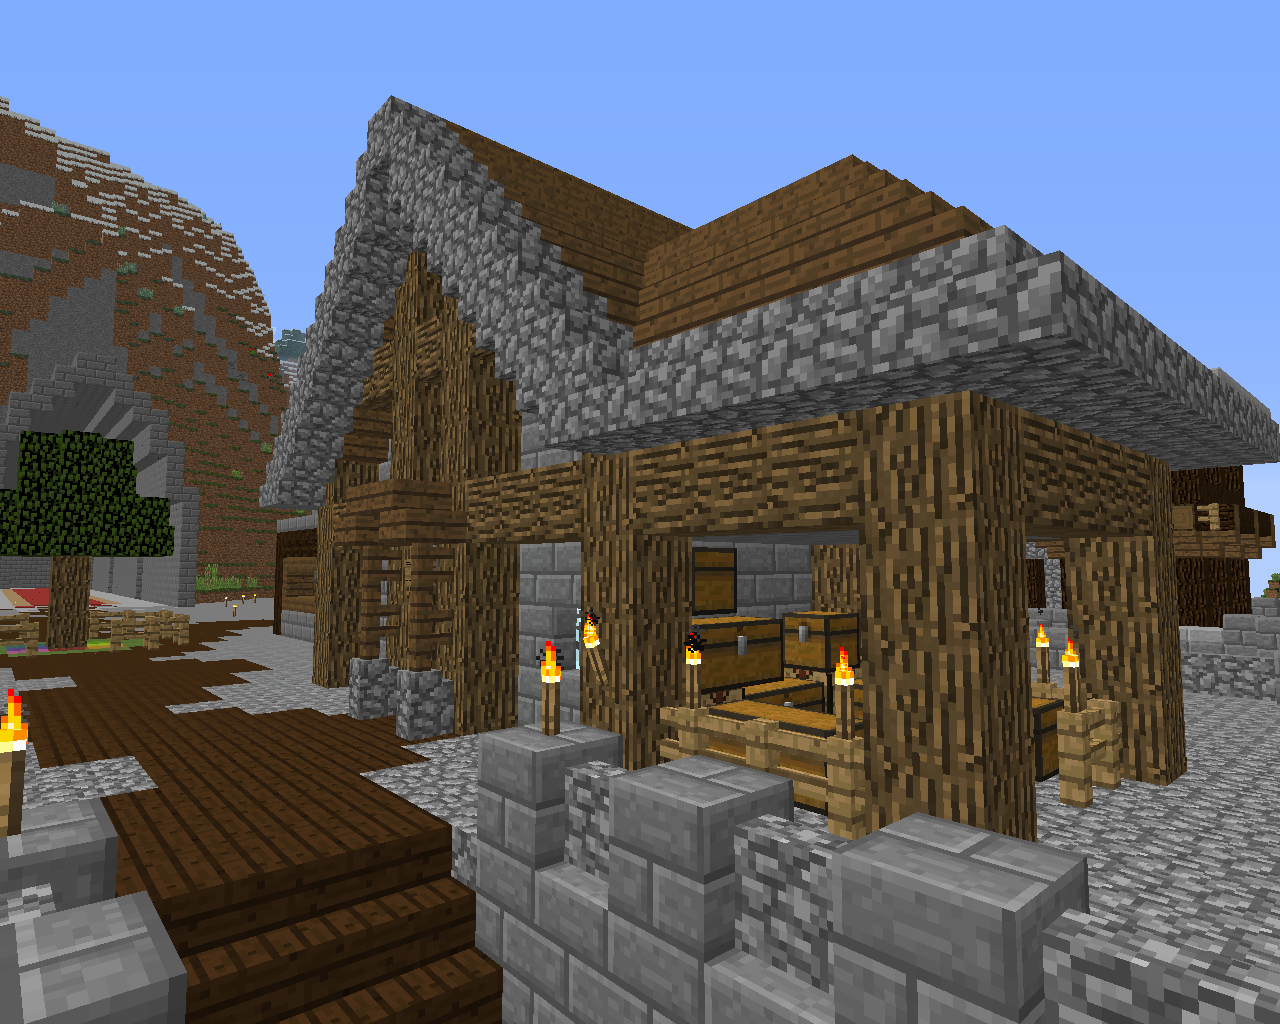  Minecraft  ideas  A cool  medieval  looking house  built by Minecraft  